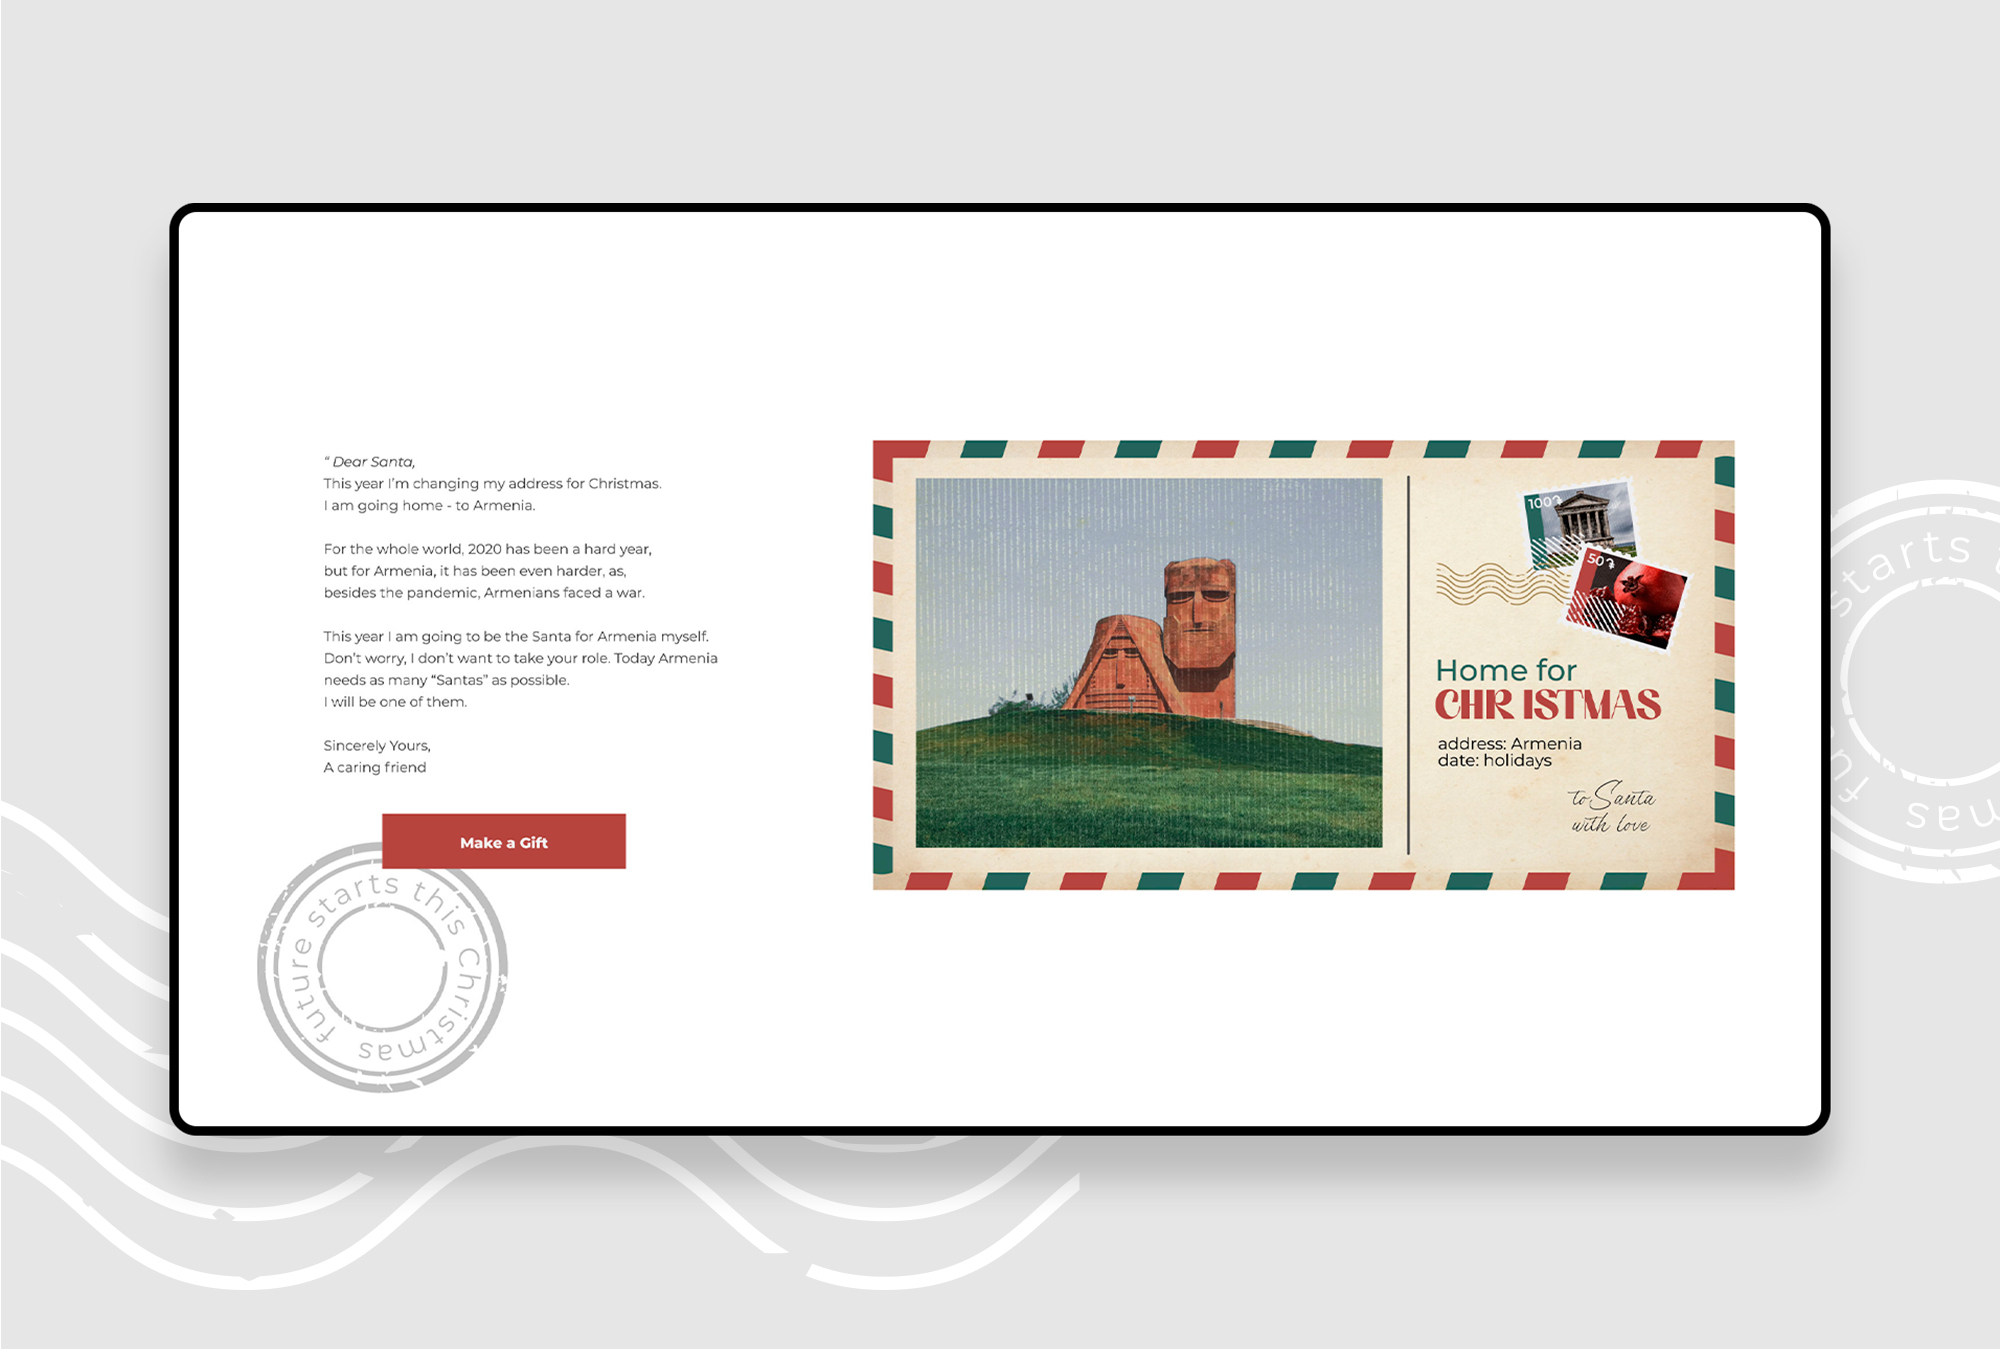 CAMPAIGN DESIGN FOR HOME FOR CHRISTMAS